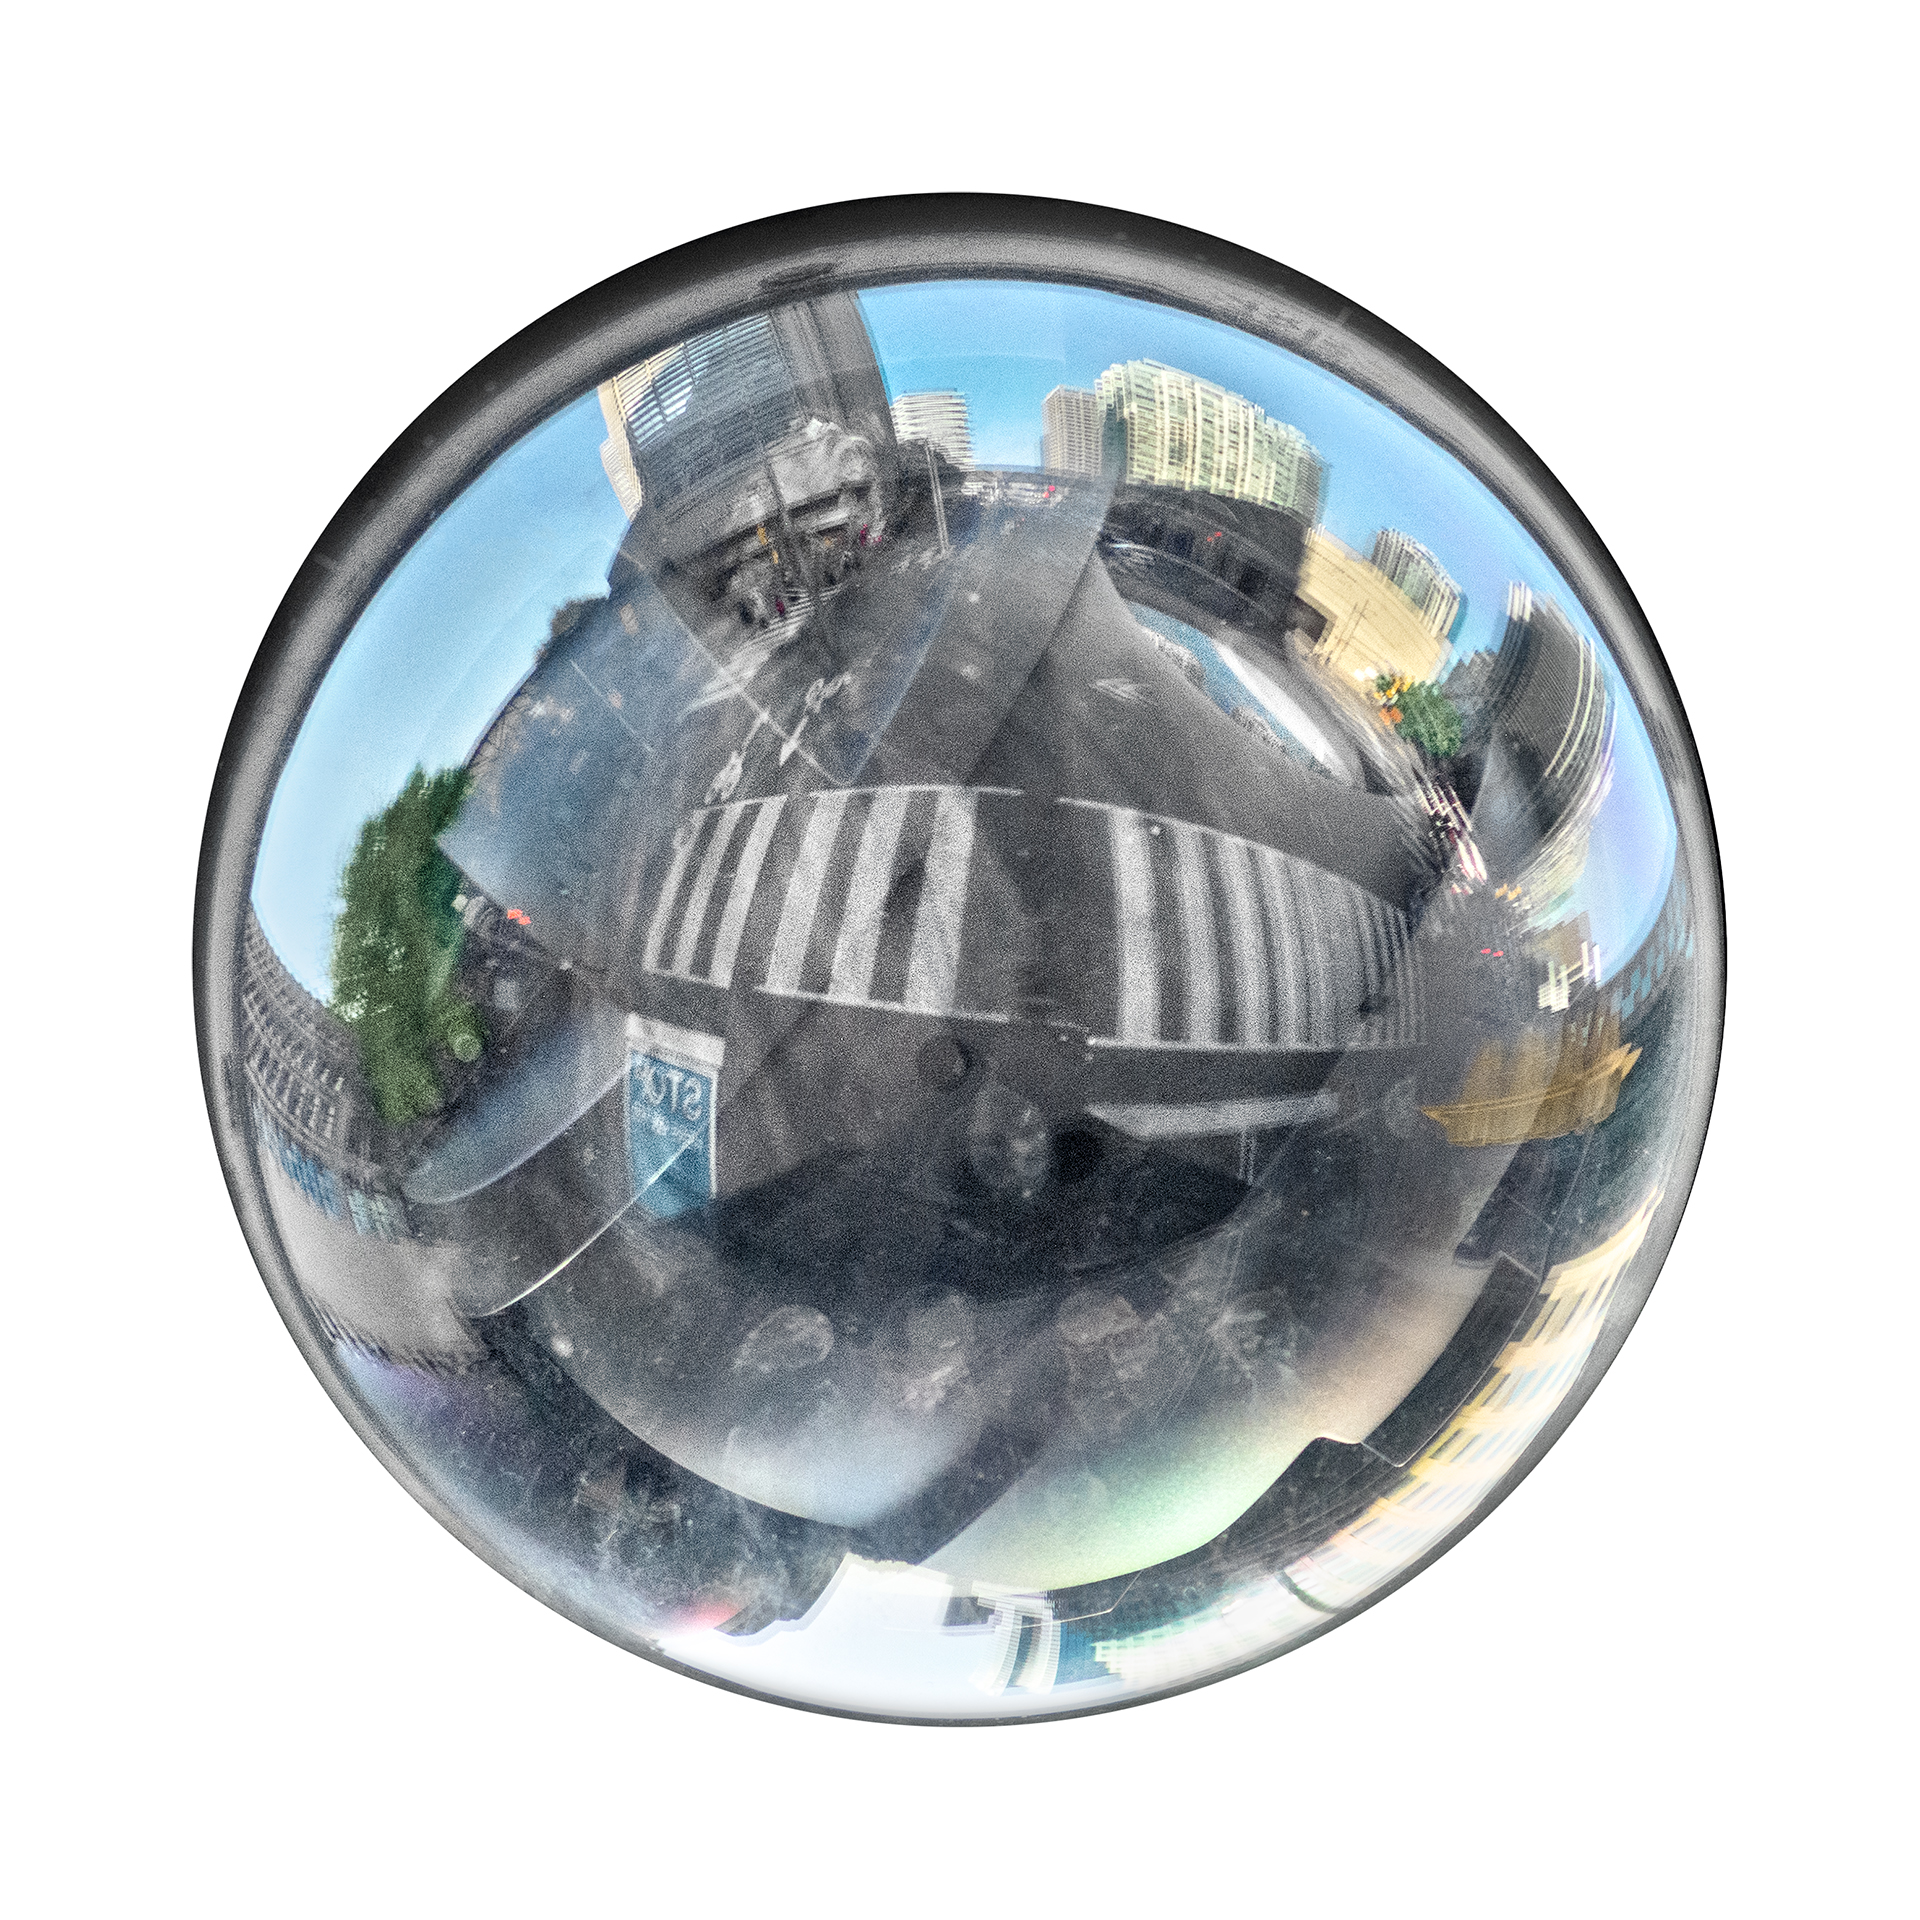 Distorted reflection of urban area and intersection in a circular security camera lens.